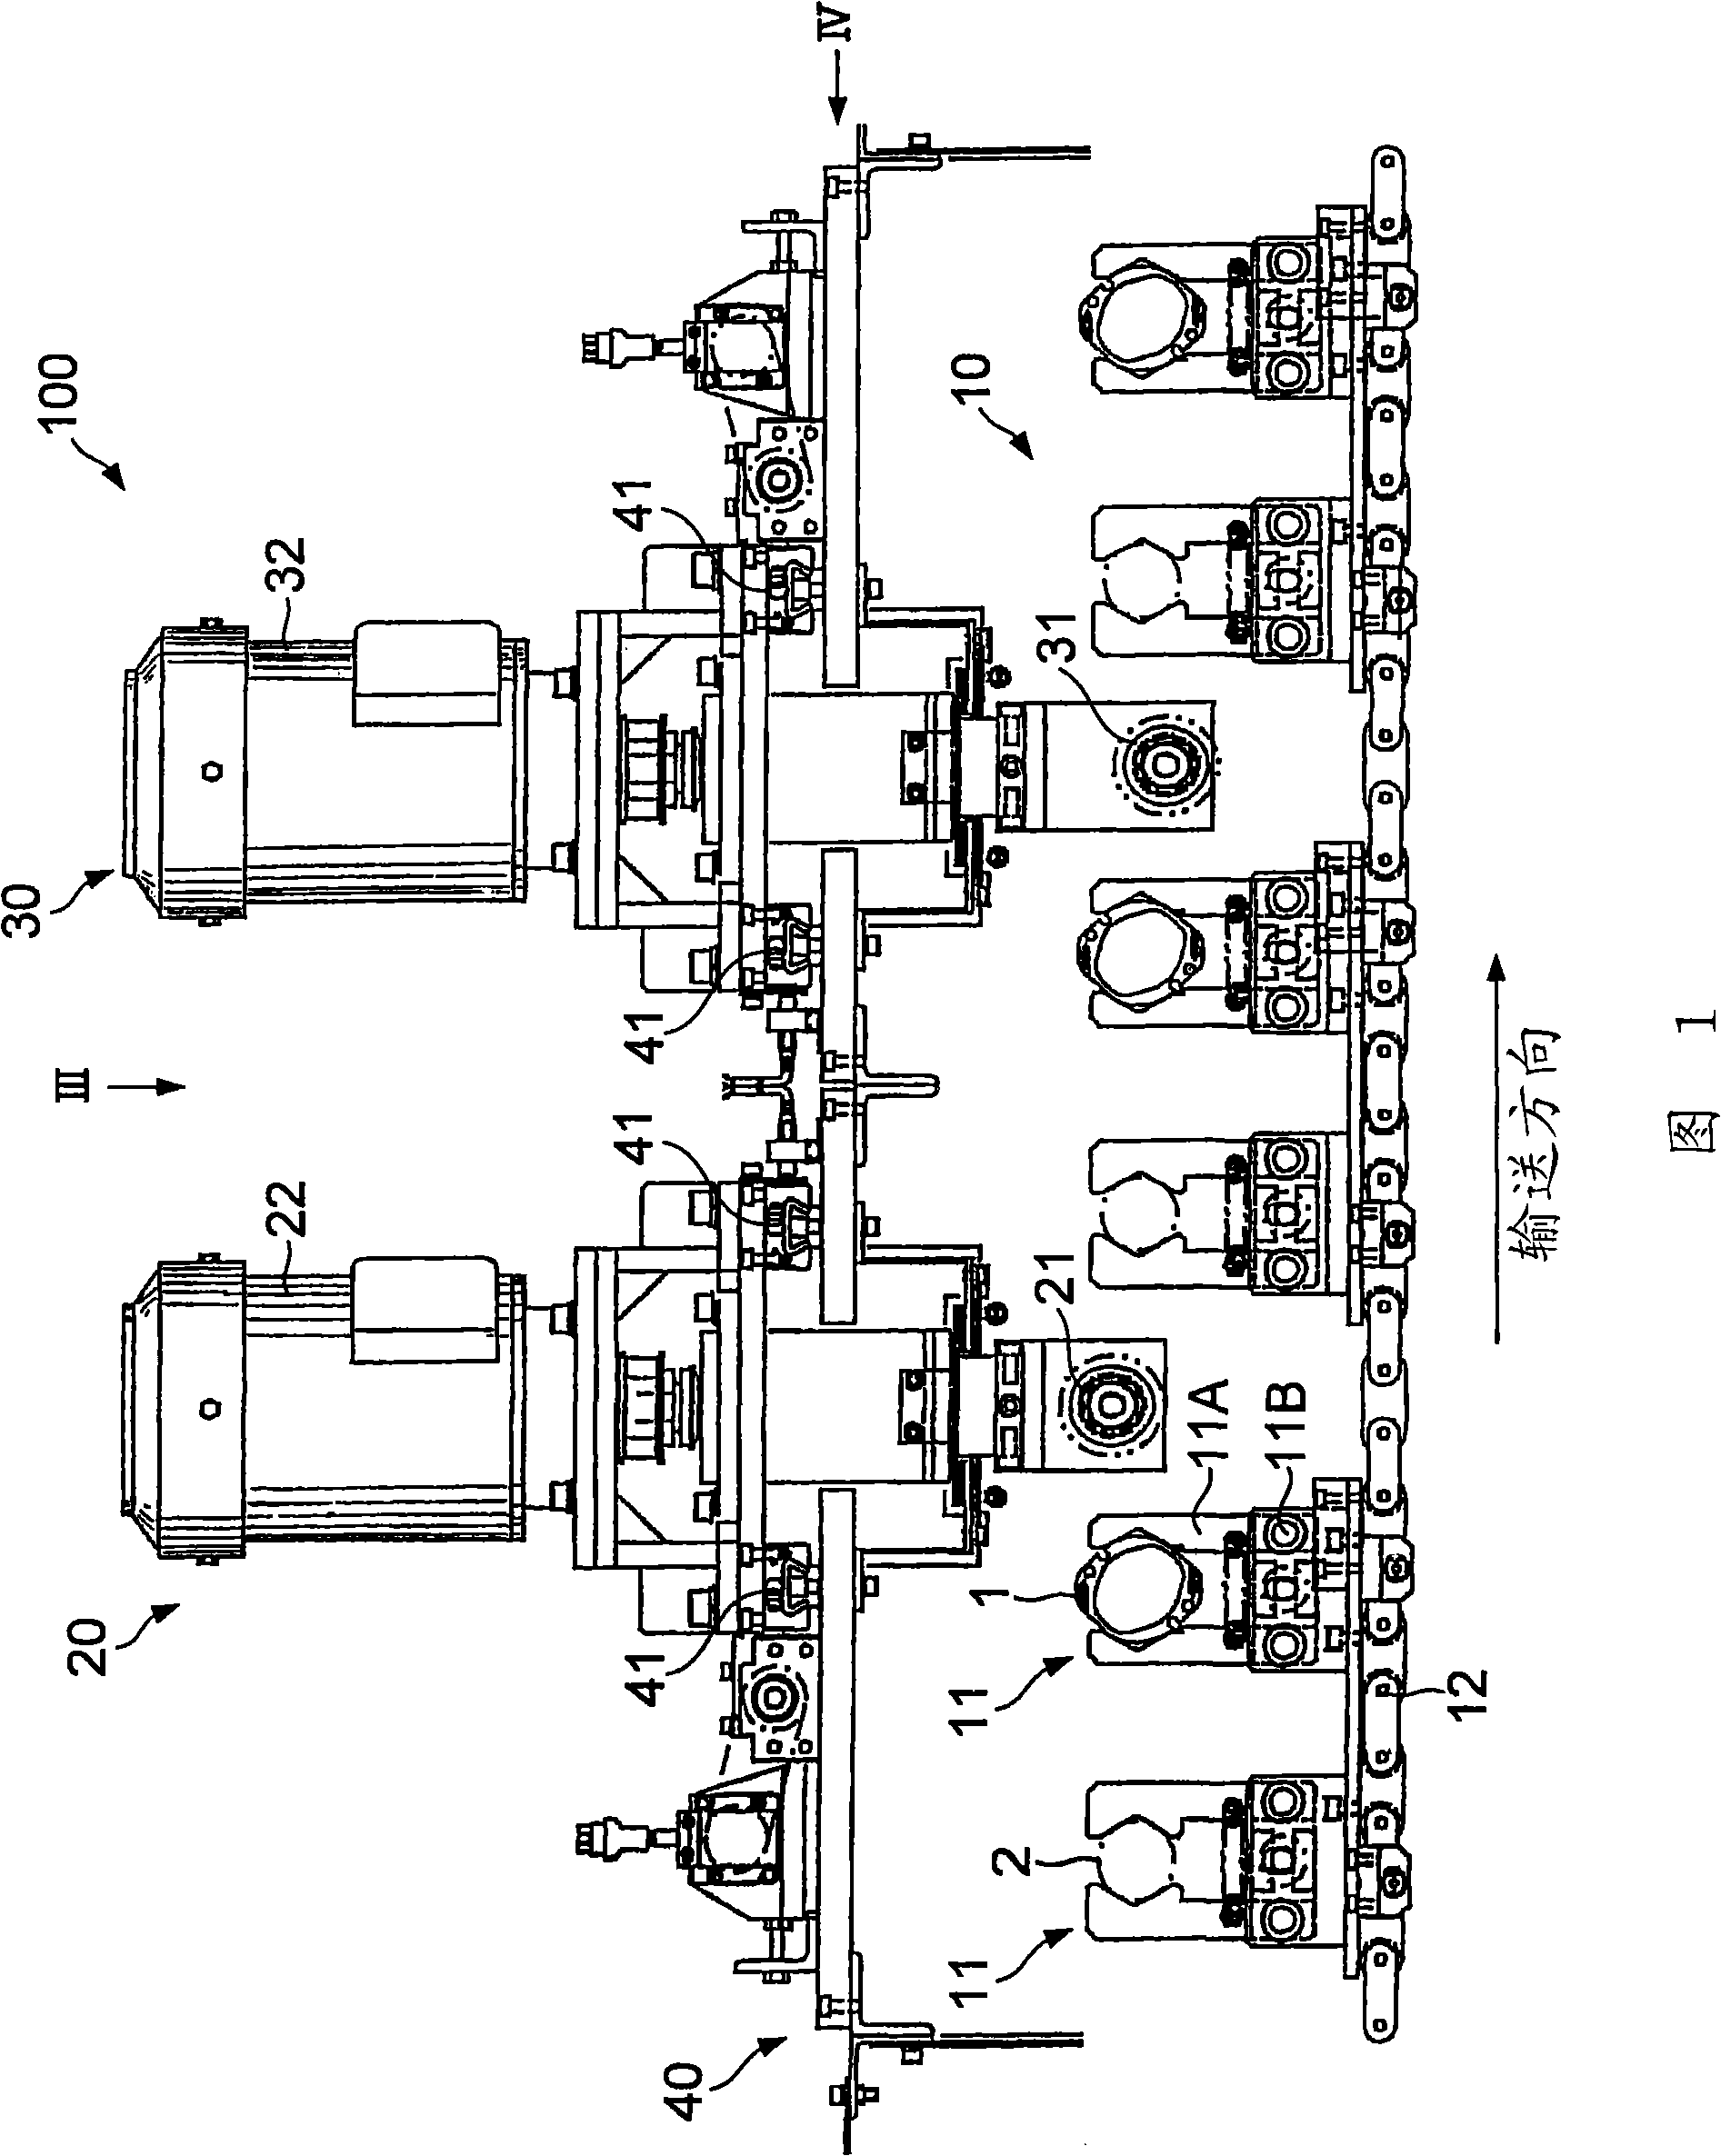 Device and method for removing burr